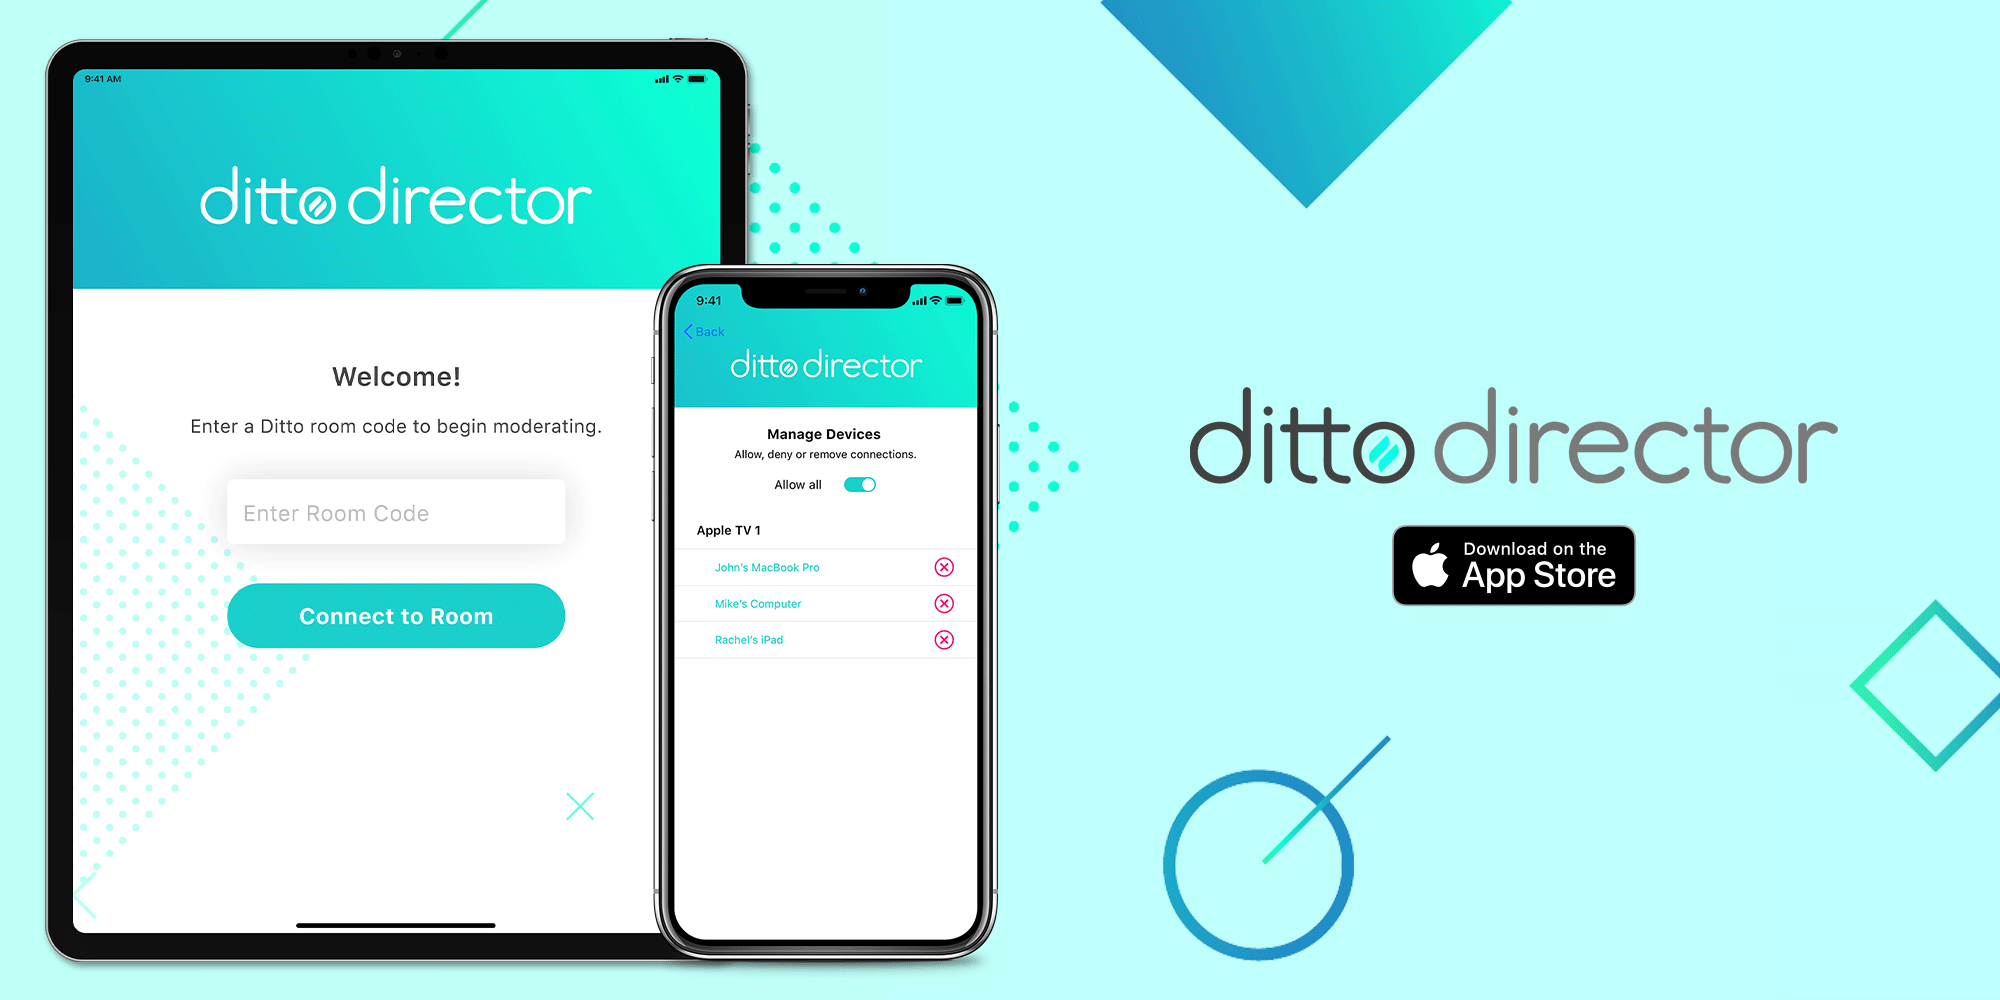 Ditto Director running on iPhone and iPad 